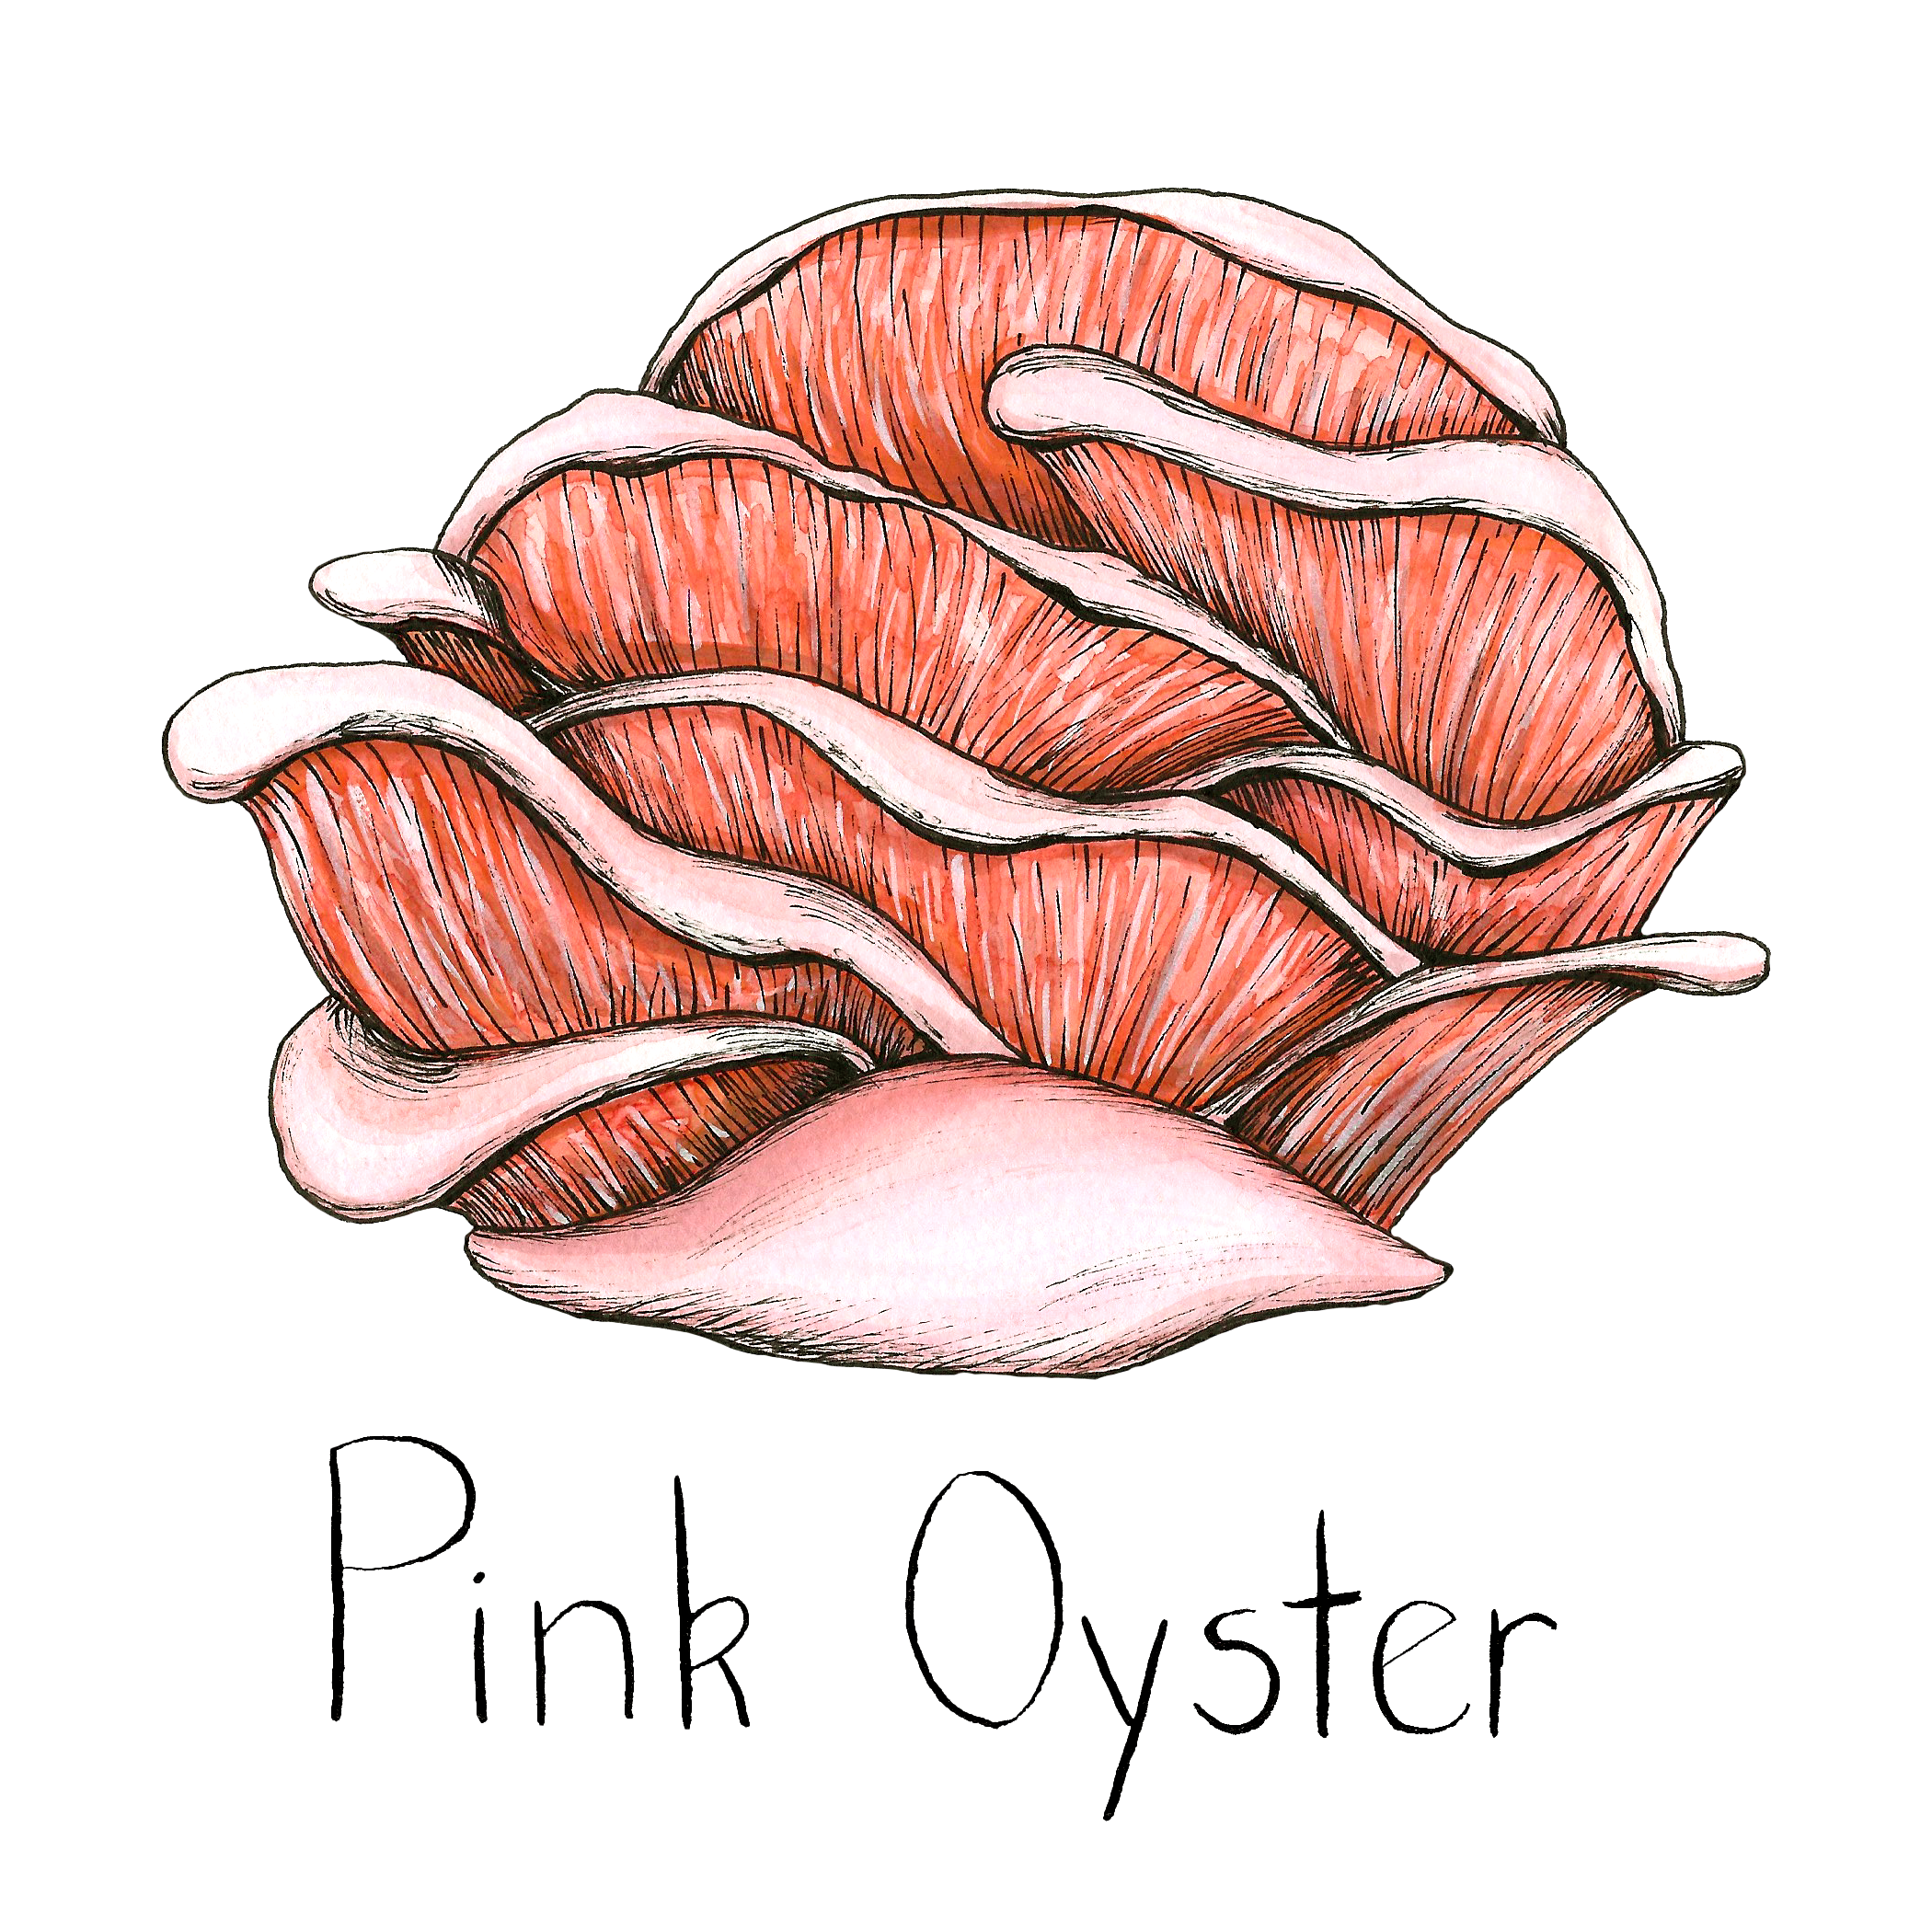 Watercolor depiction of Pink Oyster mushroom